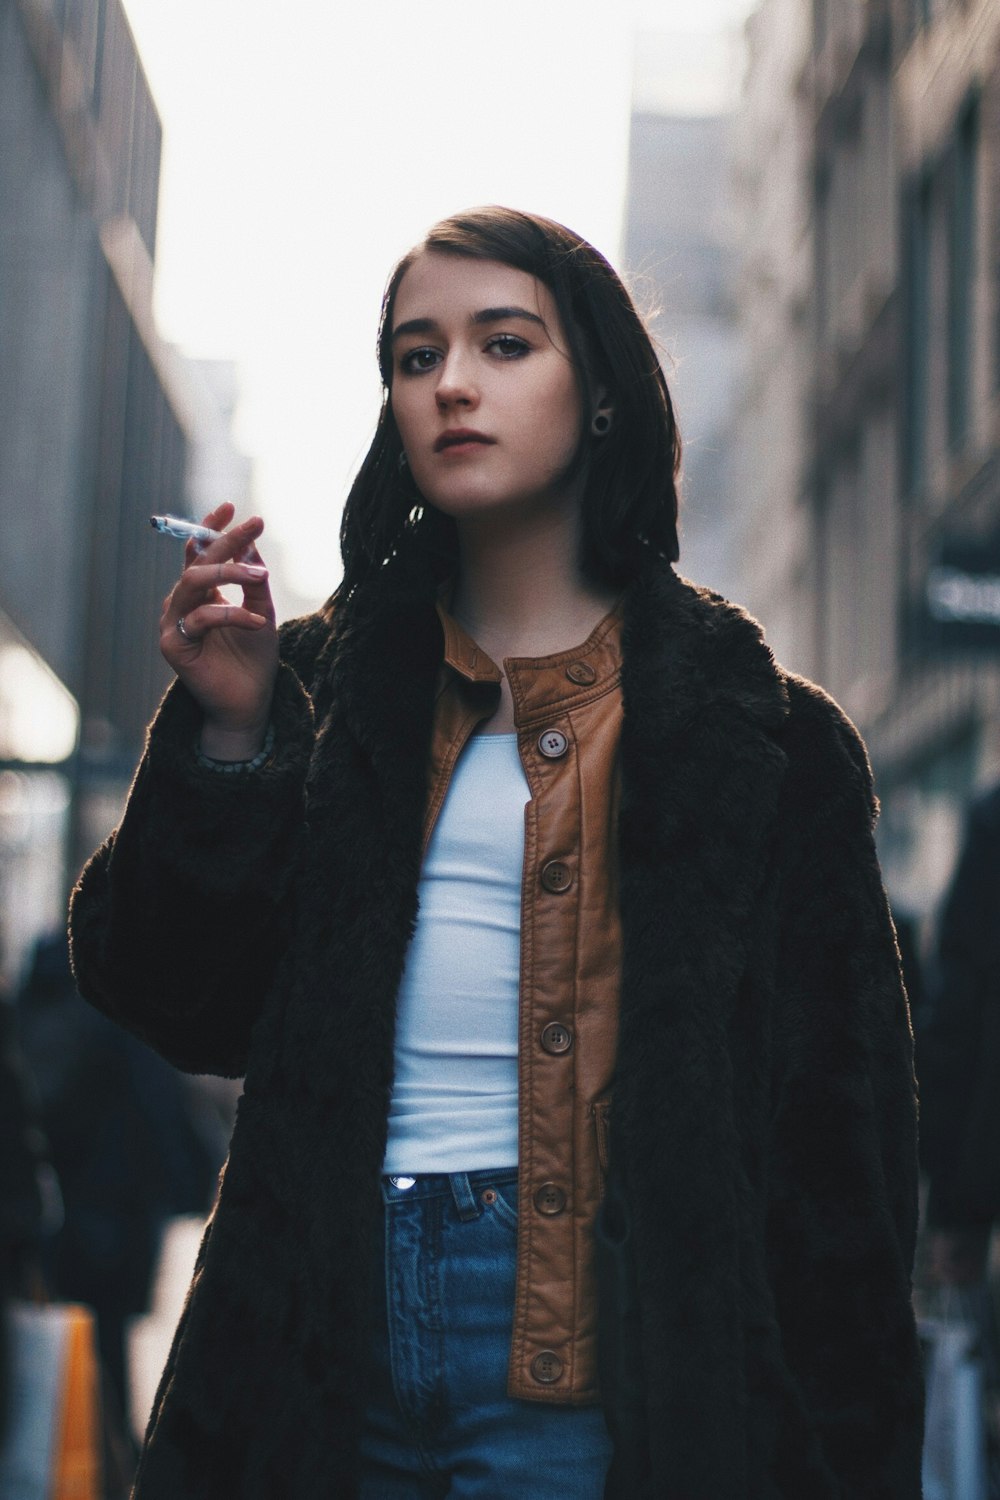 woman wearing black coat and holding cigarette stick during daytime